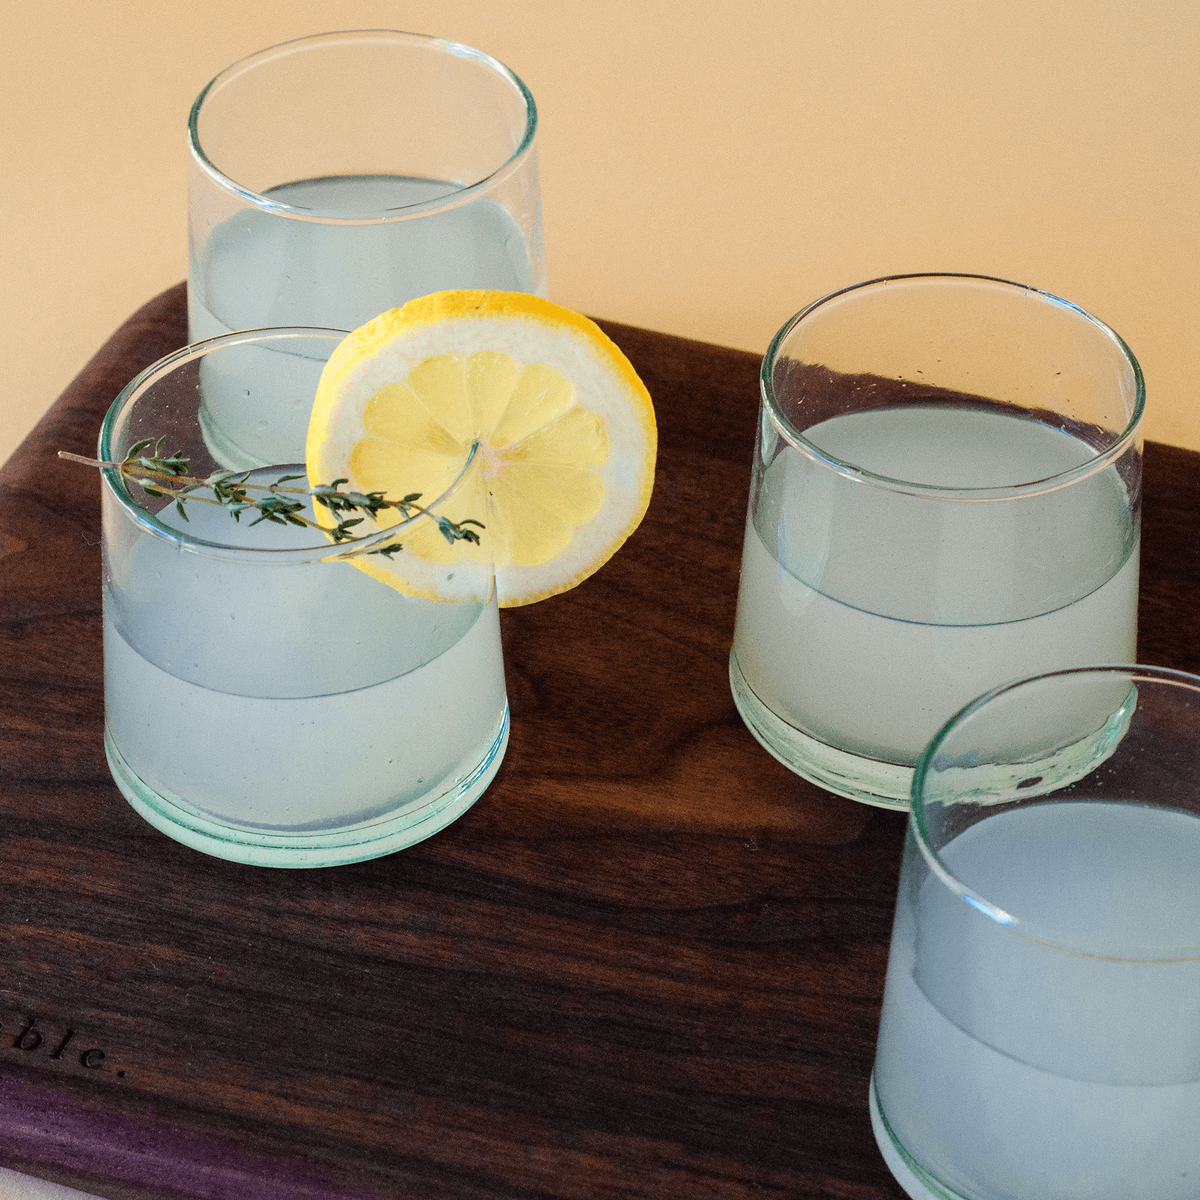 small handblown drinking glasses, filled with a cocktailed beverage and garnished with lemon slice and thyme, sitting on a solid walnut wood serving board.